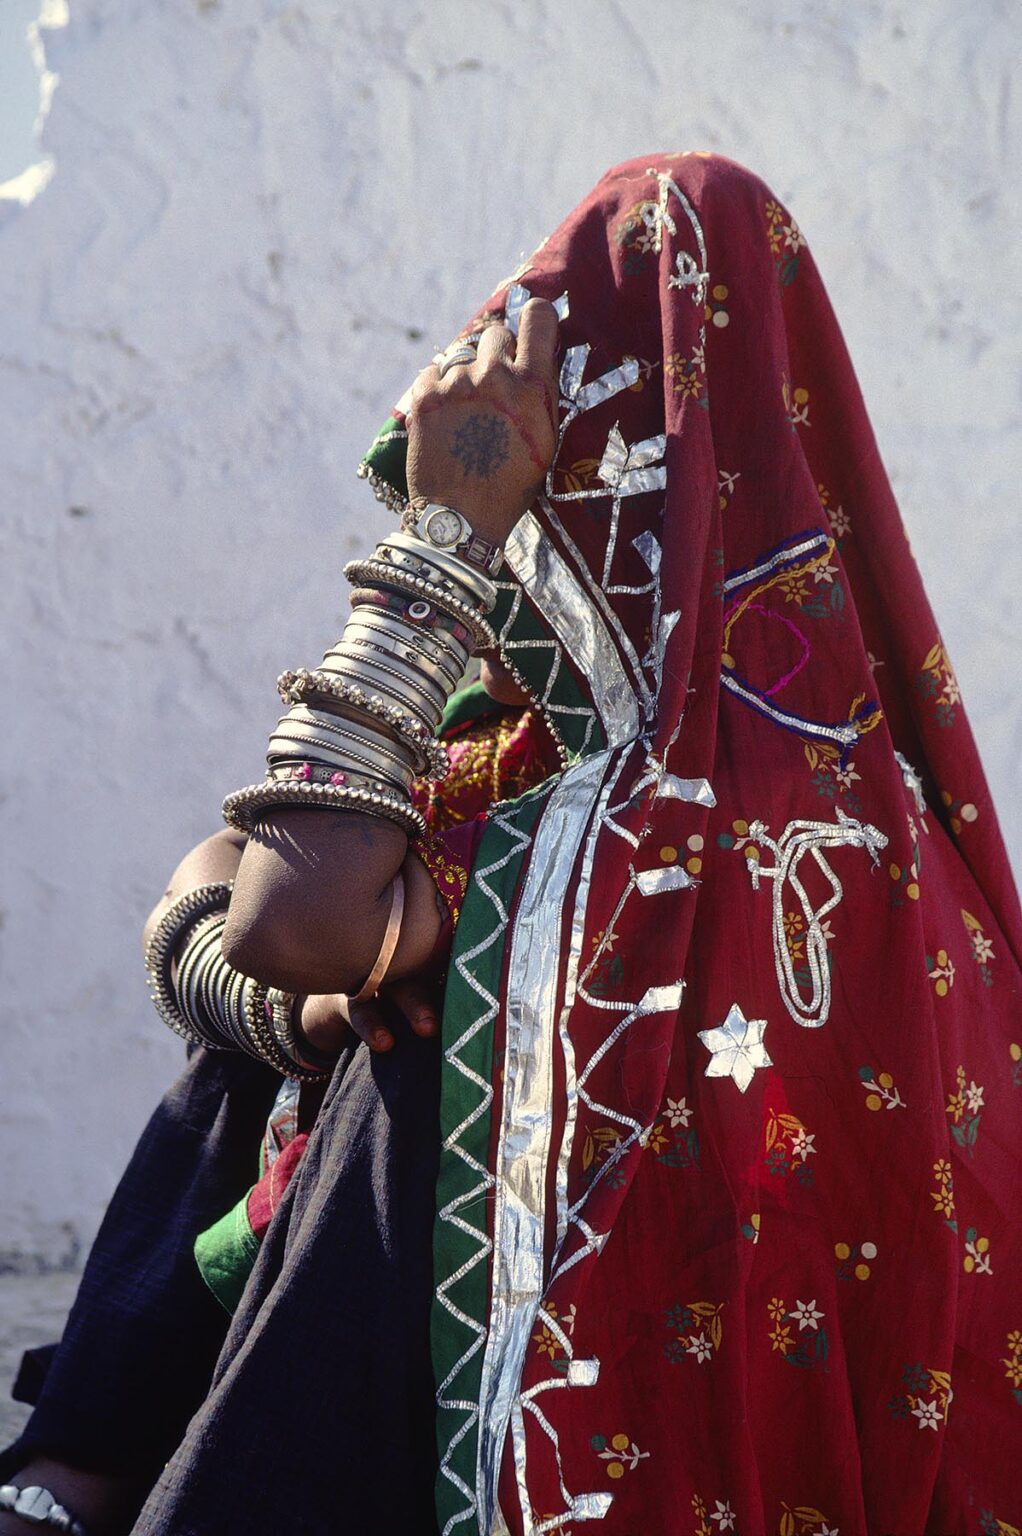 Rajasthani WOMAN with SILVER BRACELETS and an embroidered SARI at the PUSHKAR CAMEL FAIR - RAJASTHAN, INDIA